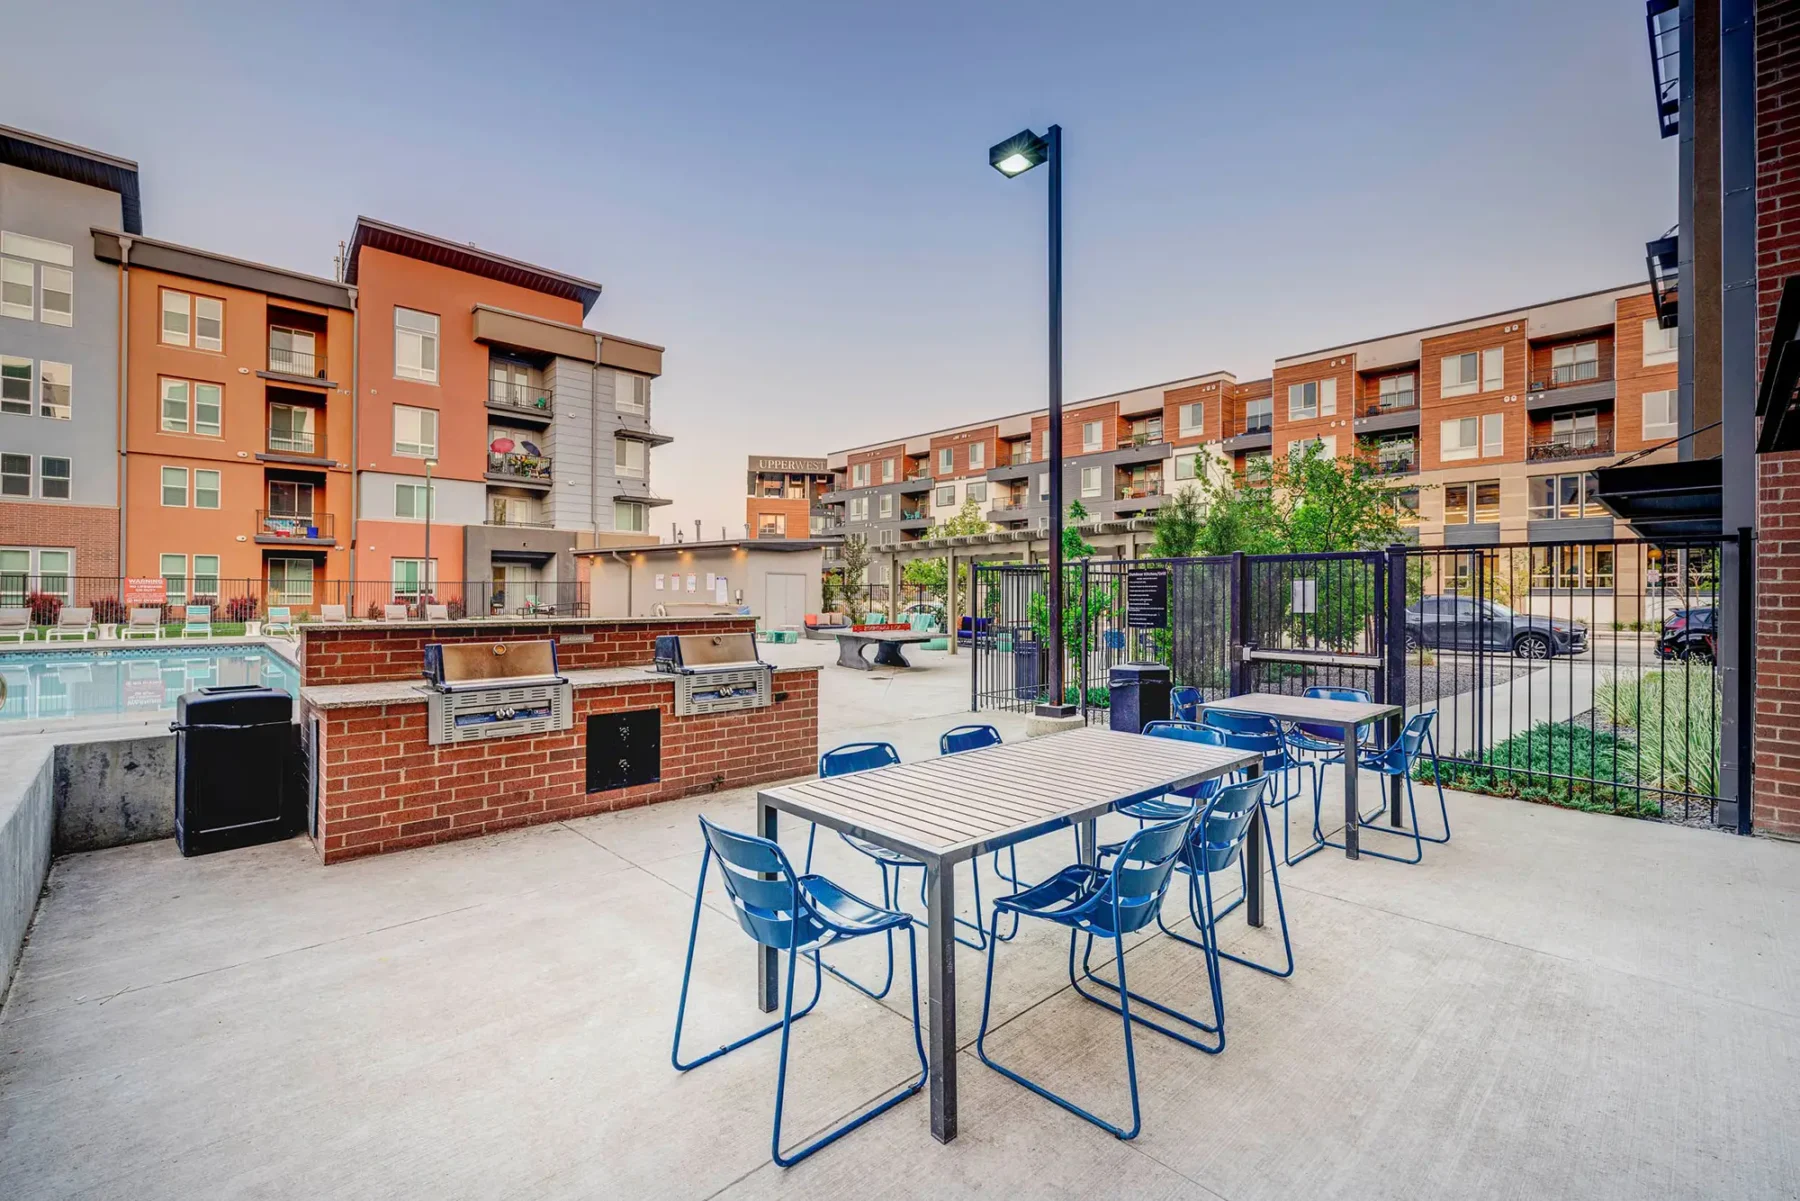 Novi at Jordan Vallery Station courtyard with two grilling stations, patio dinning tables and chairs, a swimming pool, and security fence surround